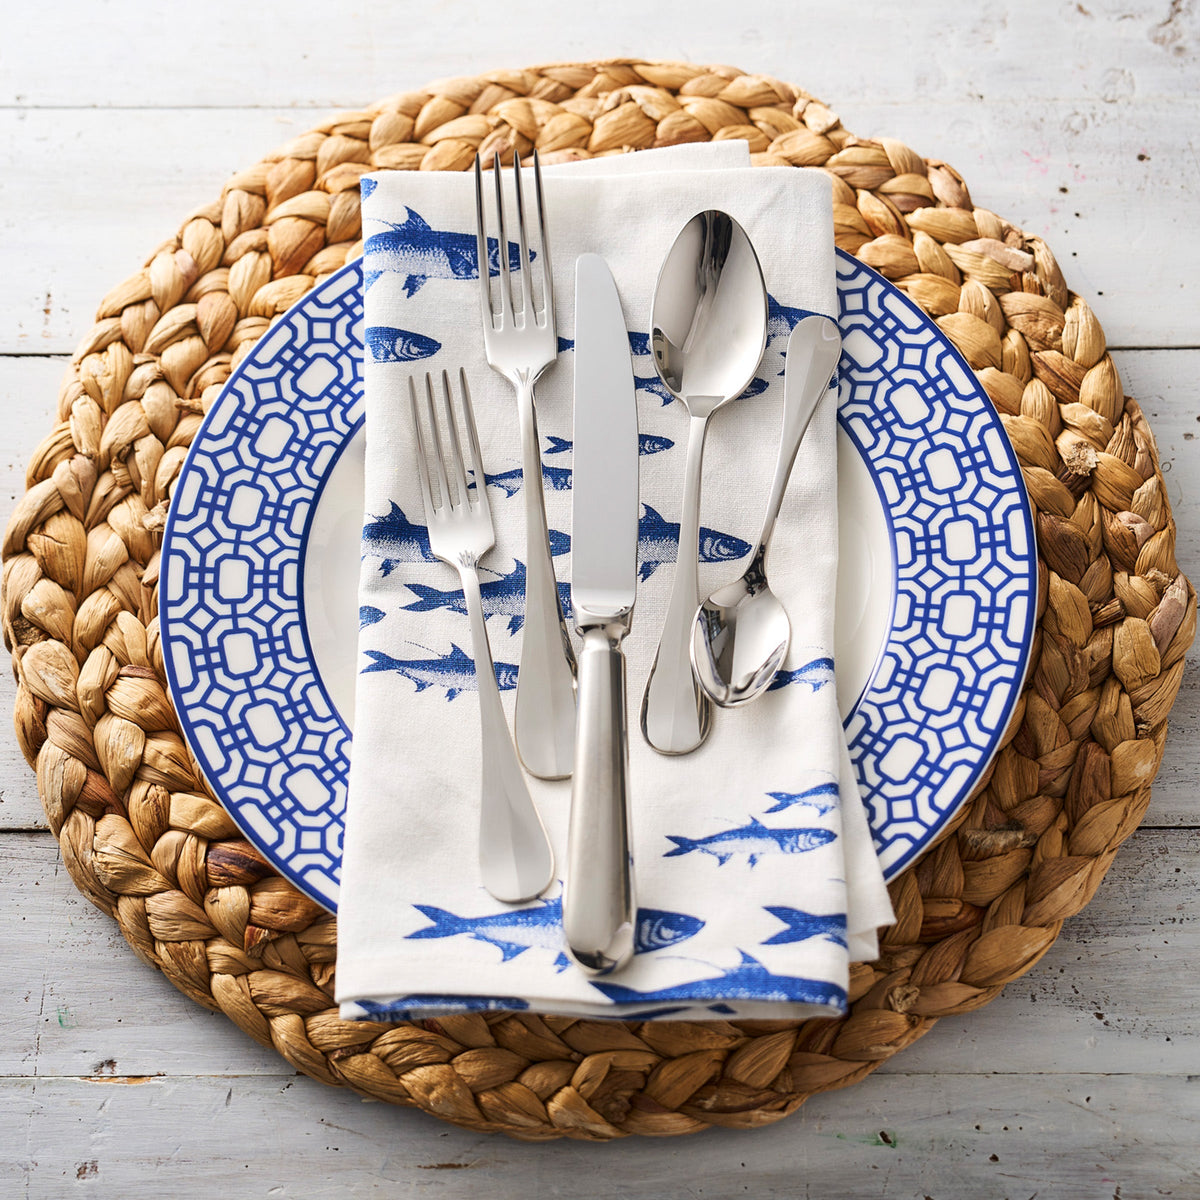 An elegant setting with the Degrenne Ridge 5-Piece Flatware Setting featuring blue and white place setting and polished finish cutlery in a lightweight design.